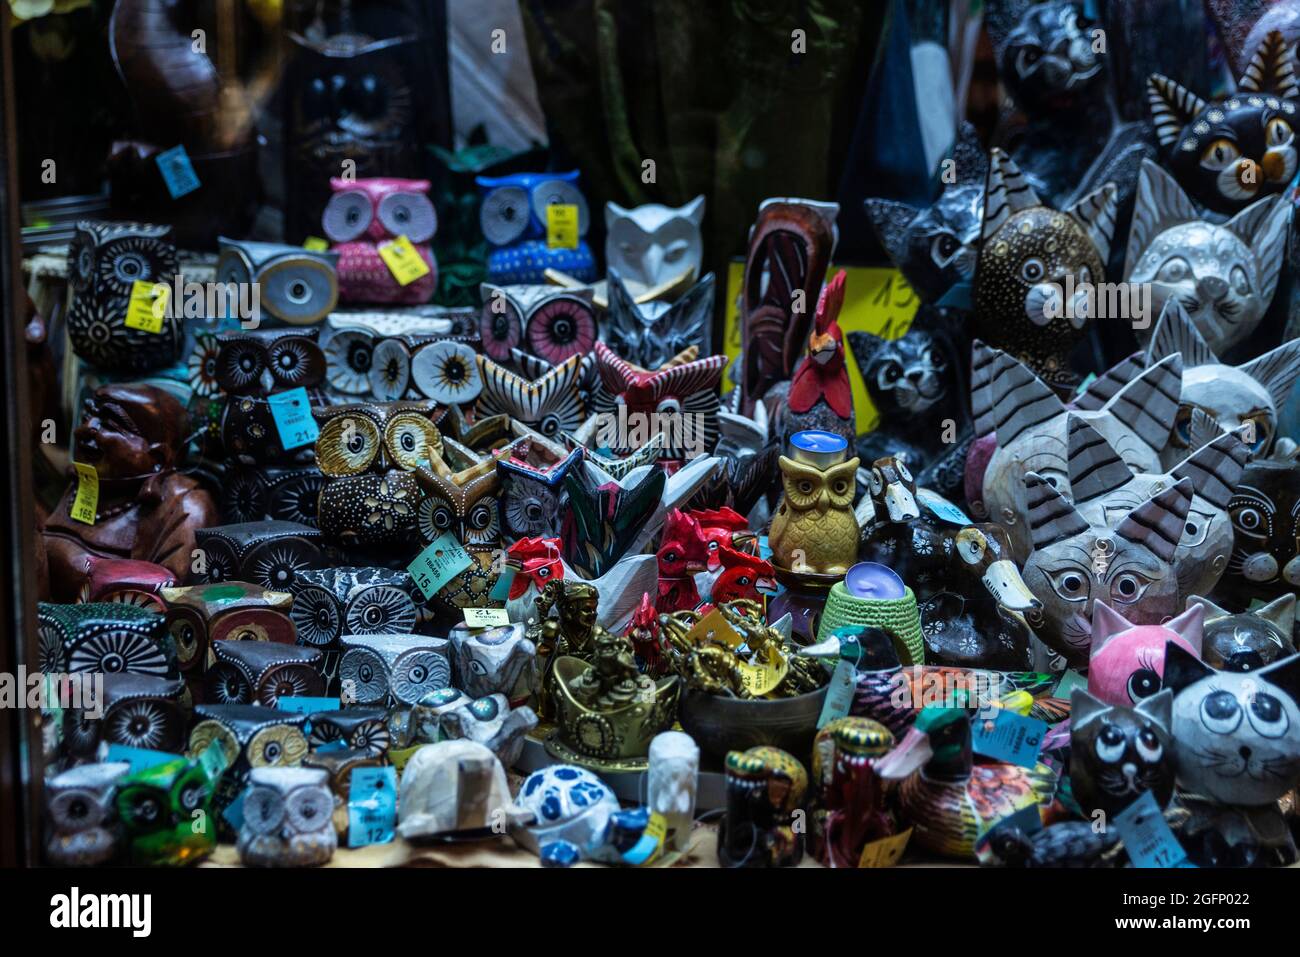 Krakow, Poland - August 29, 2018: Display of a Original polish pottery shop with figures of cats and owls at night in the Slawkowska Street, shopping Stock Photo